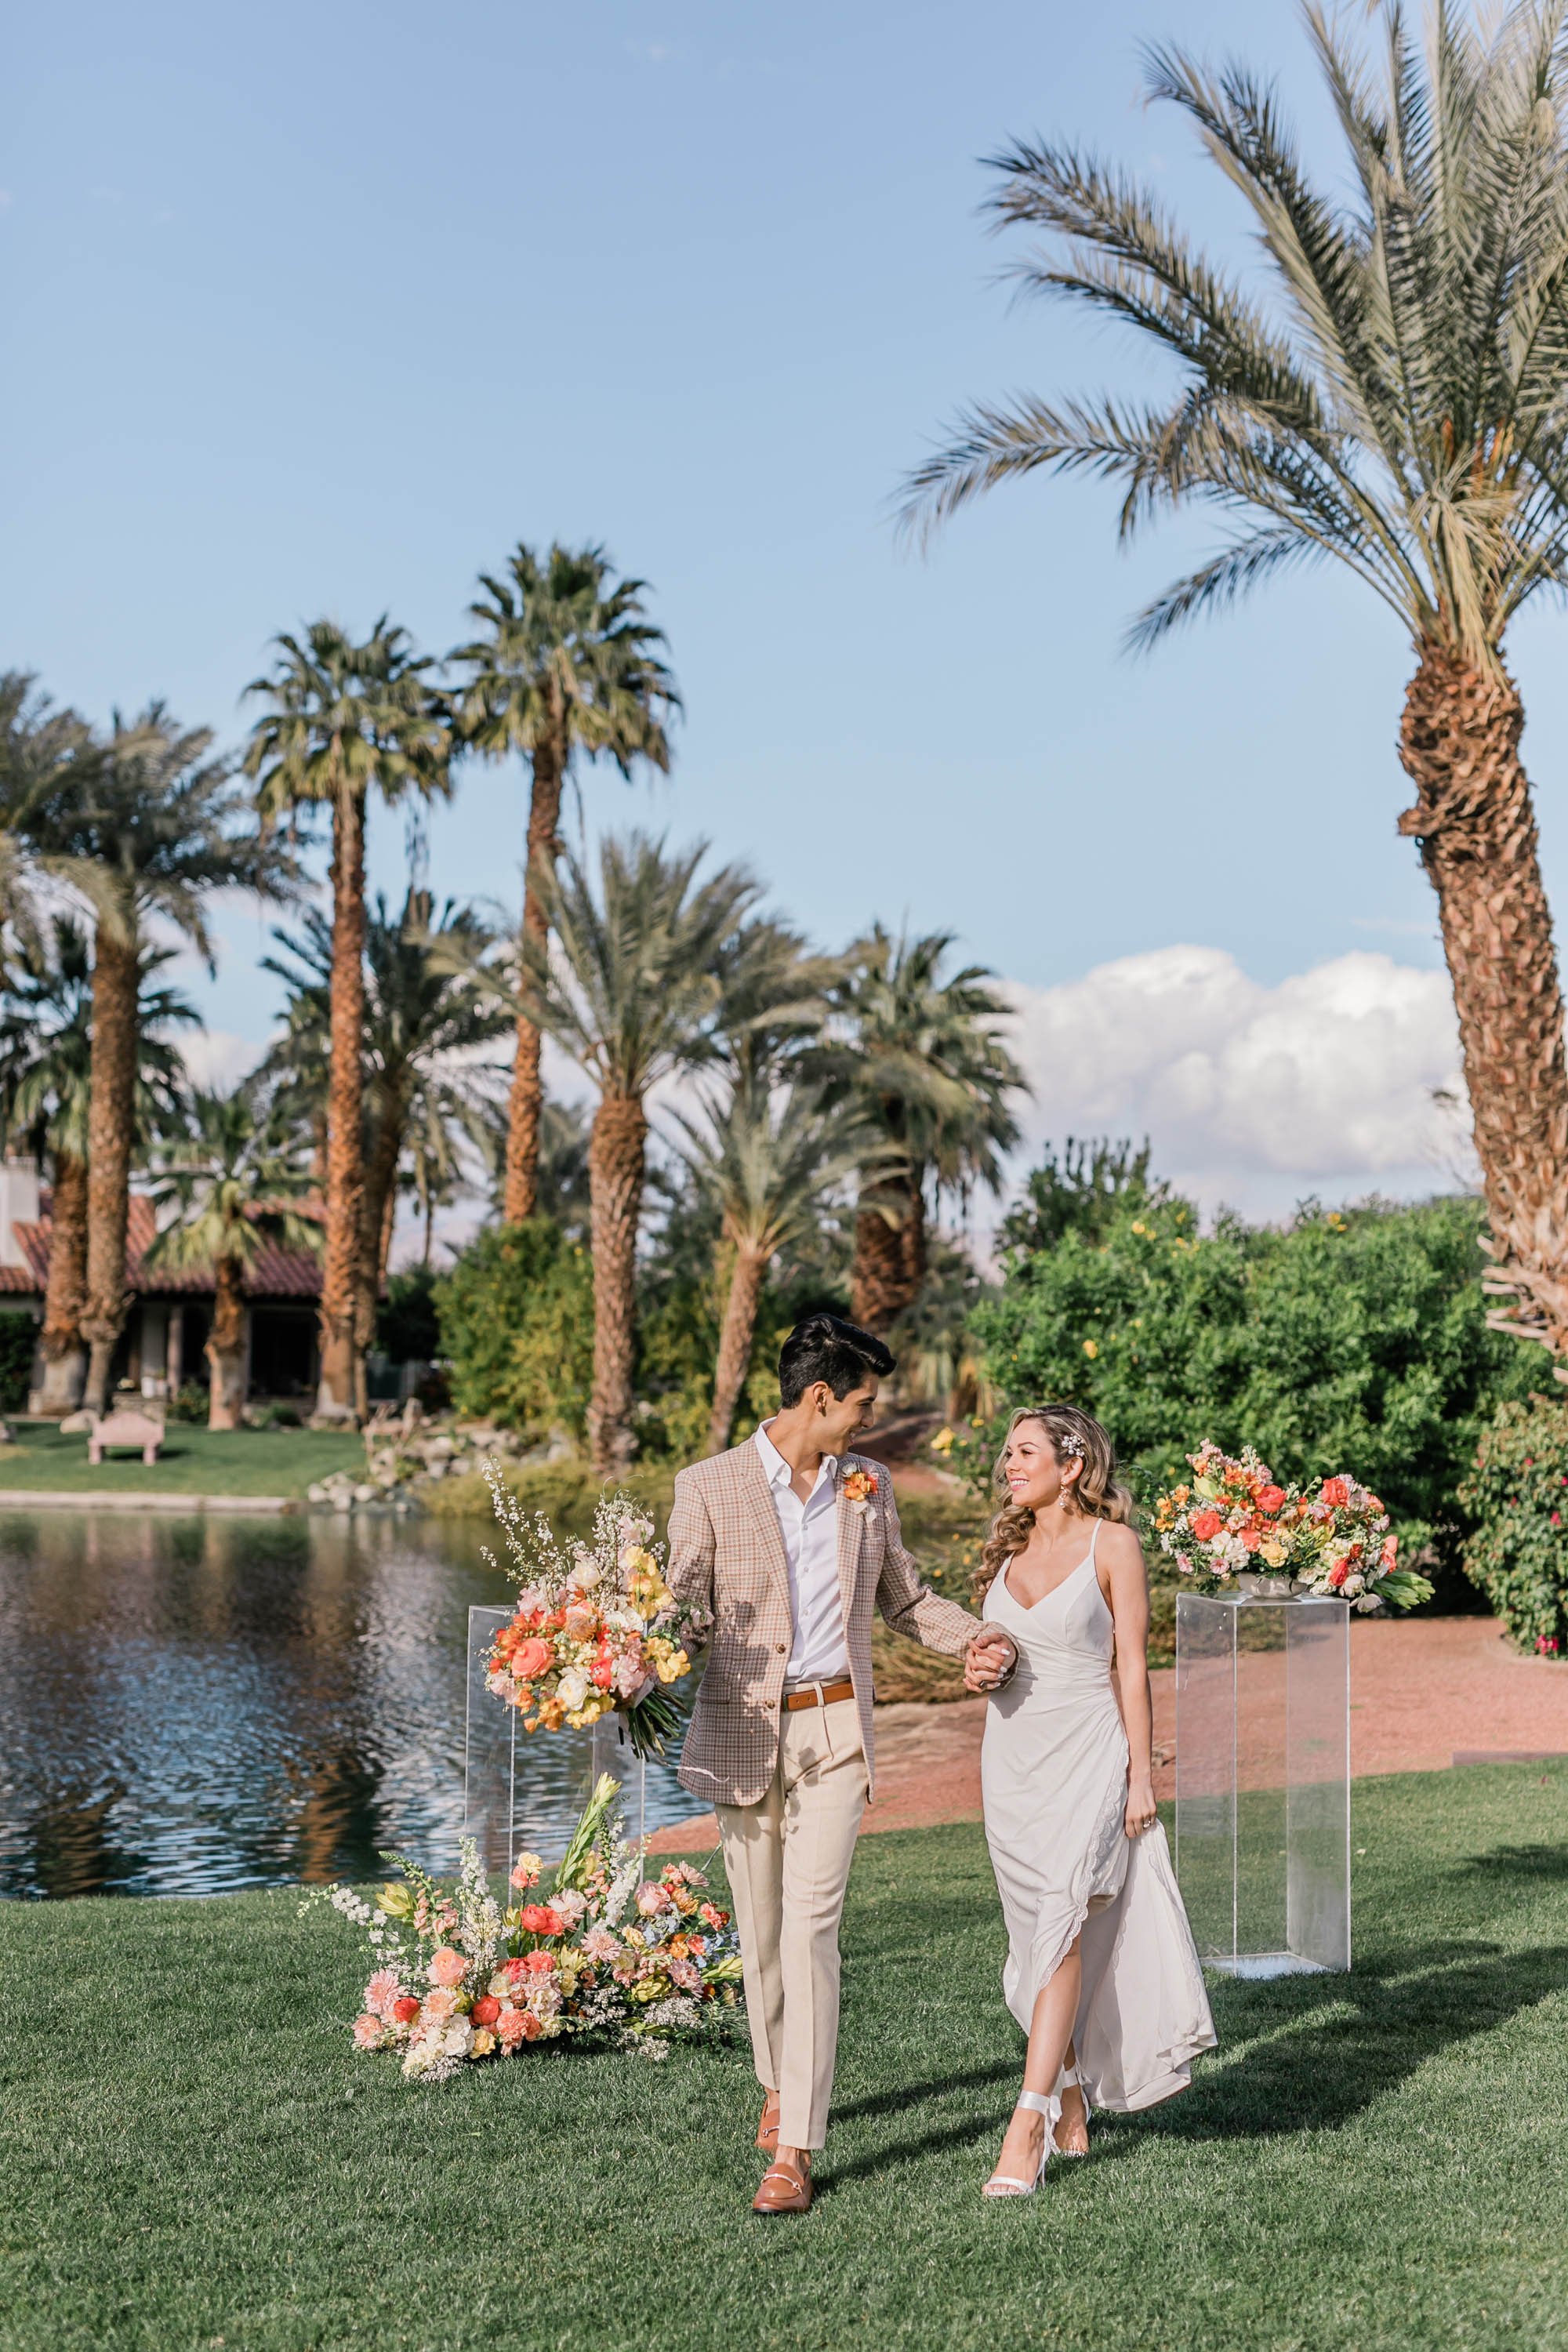 Lakeside Palm Springs wedding ceremony at Bougainvillea Estate. 